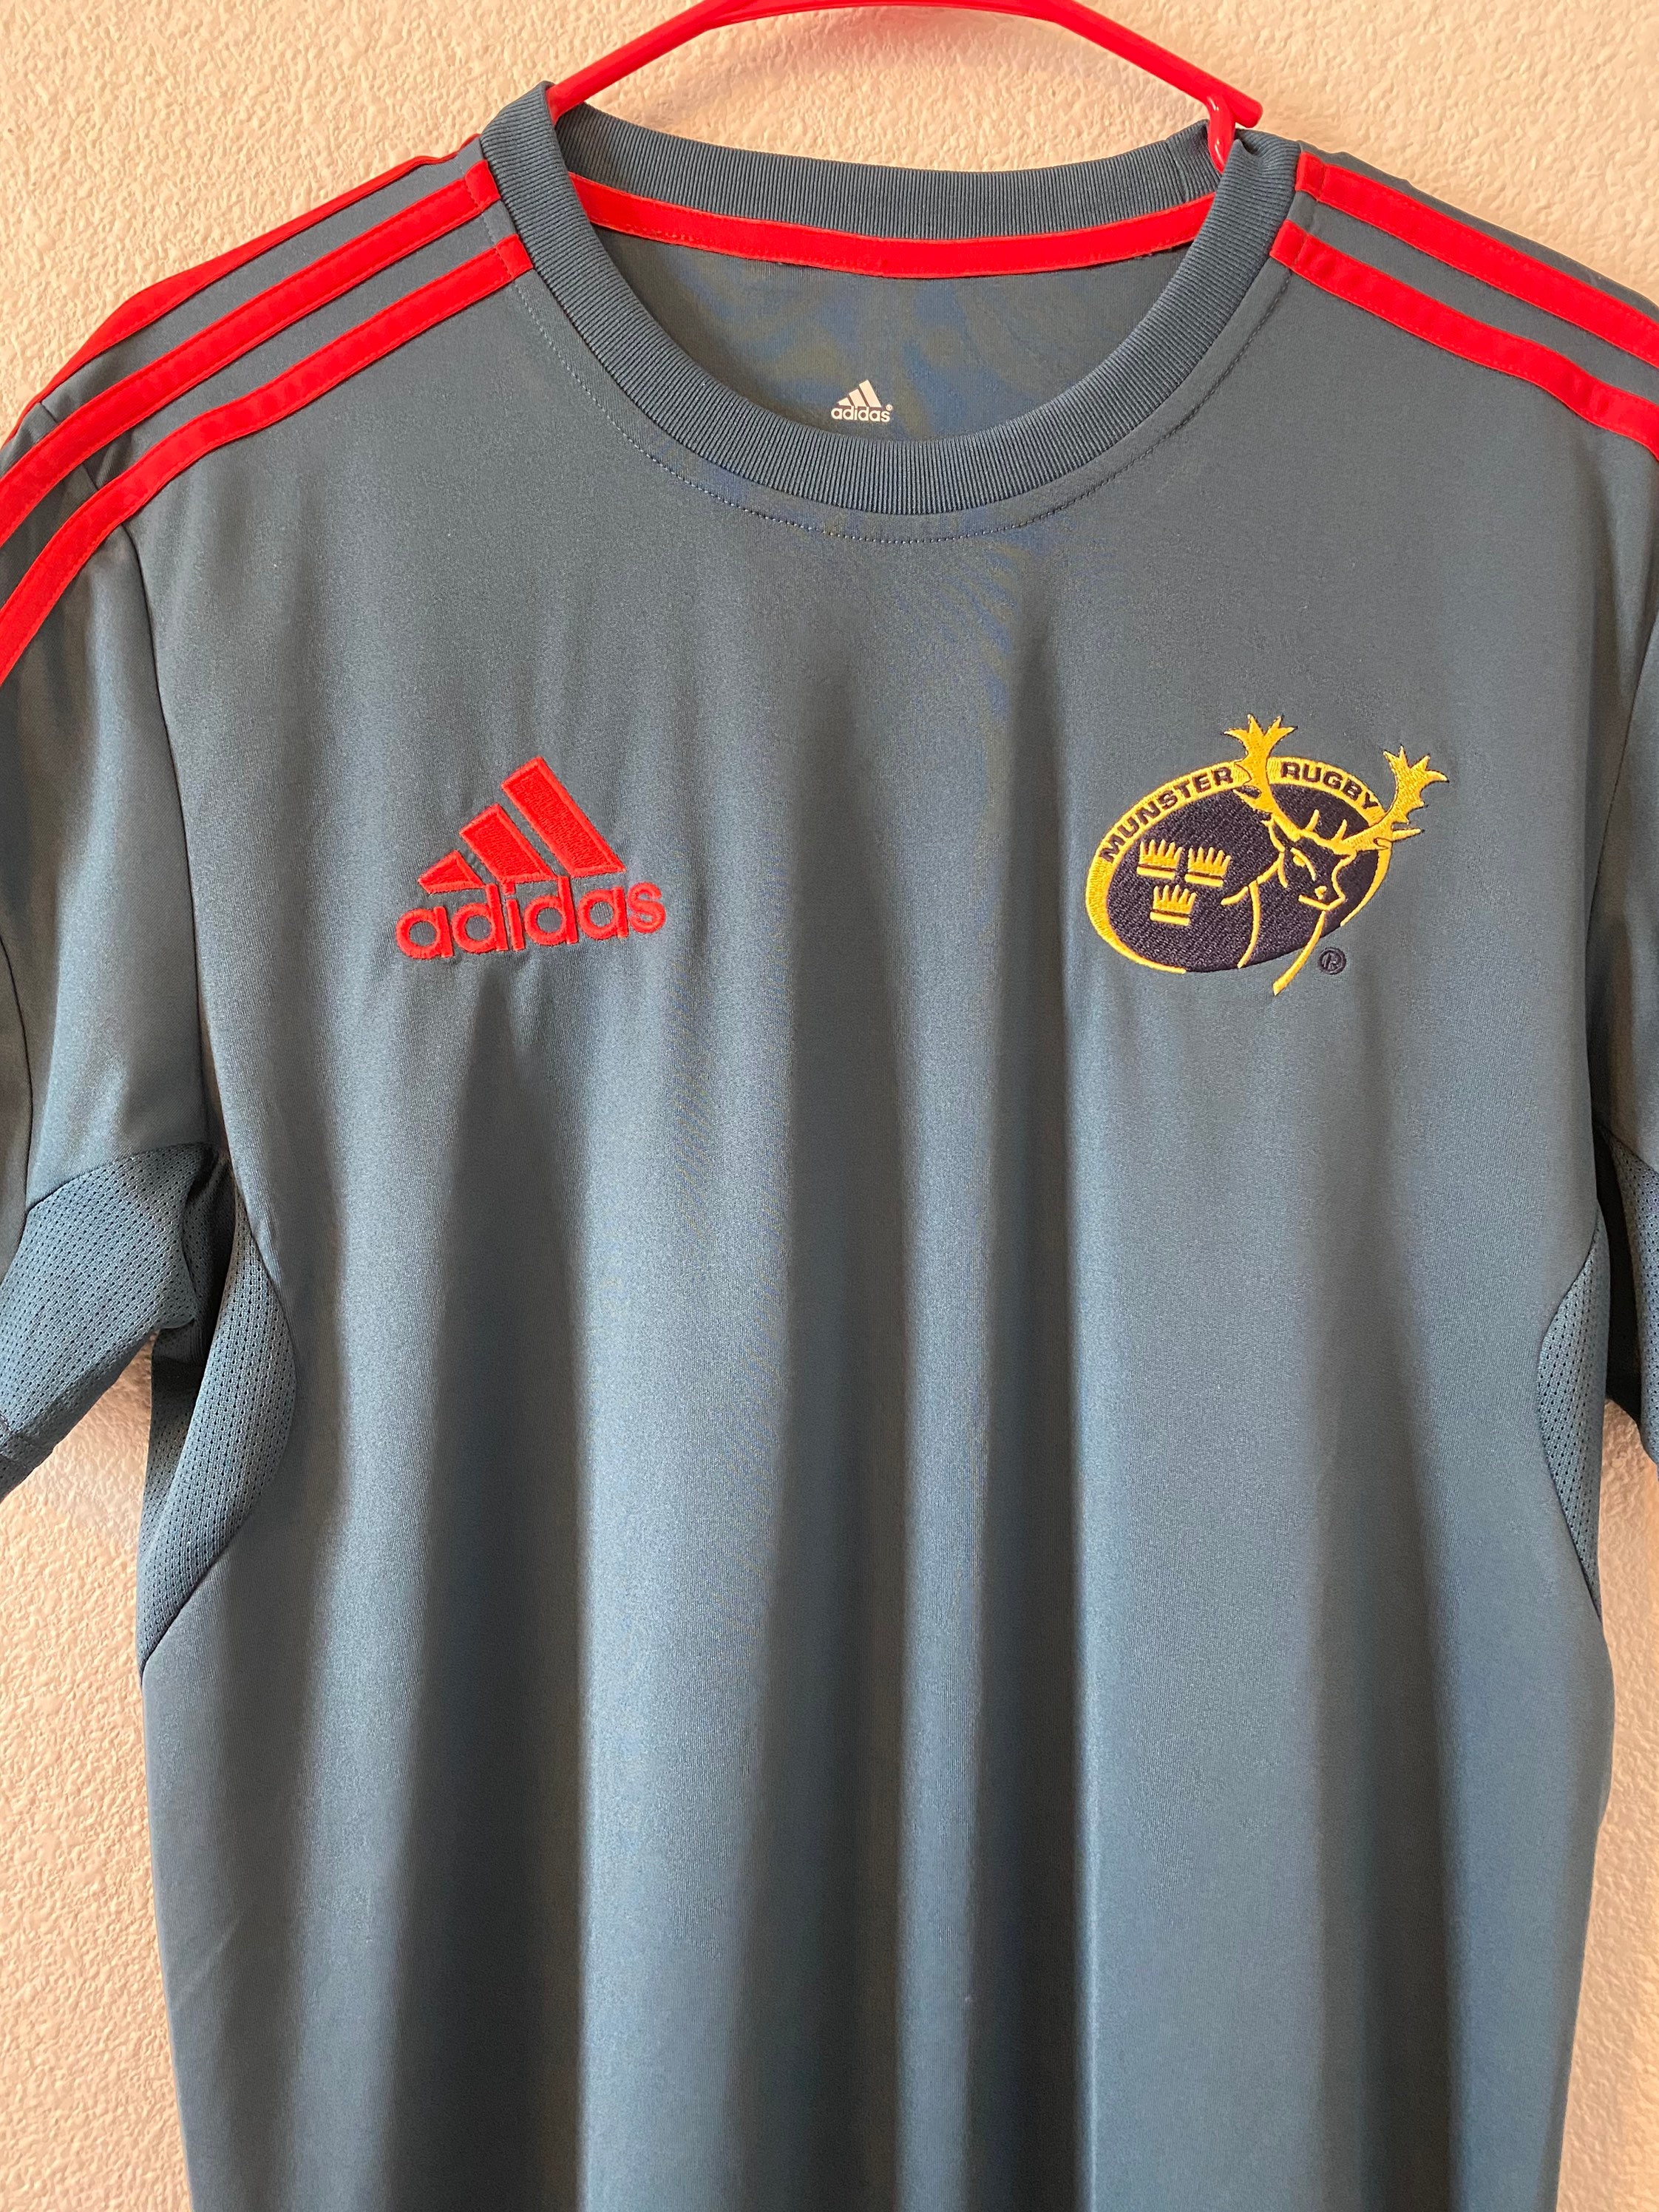 Buy Adidas Clima Cool Munster Rugby Team Jersey Size Medium